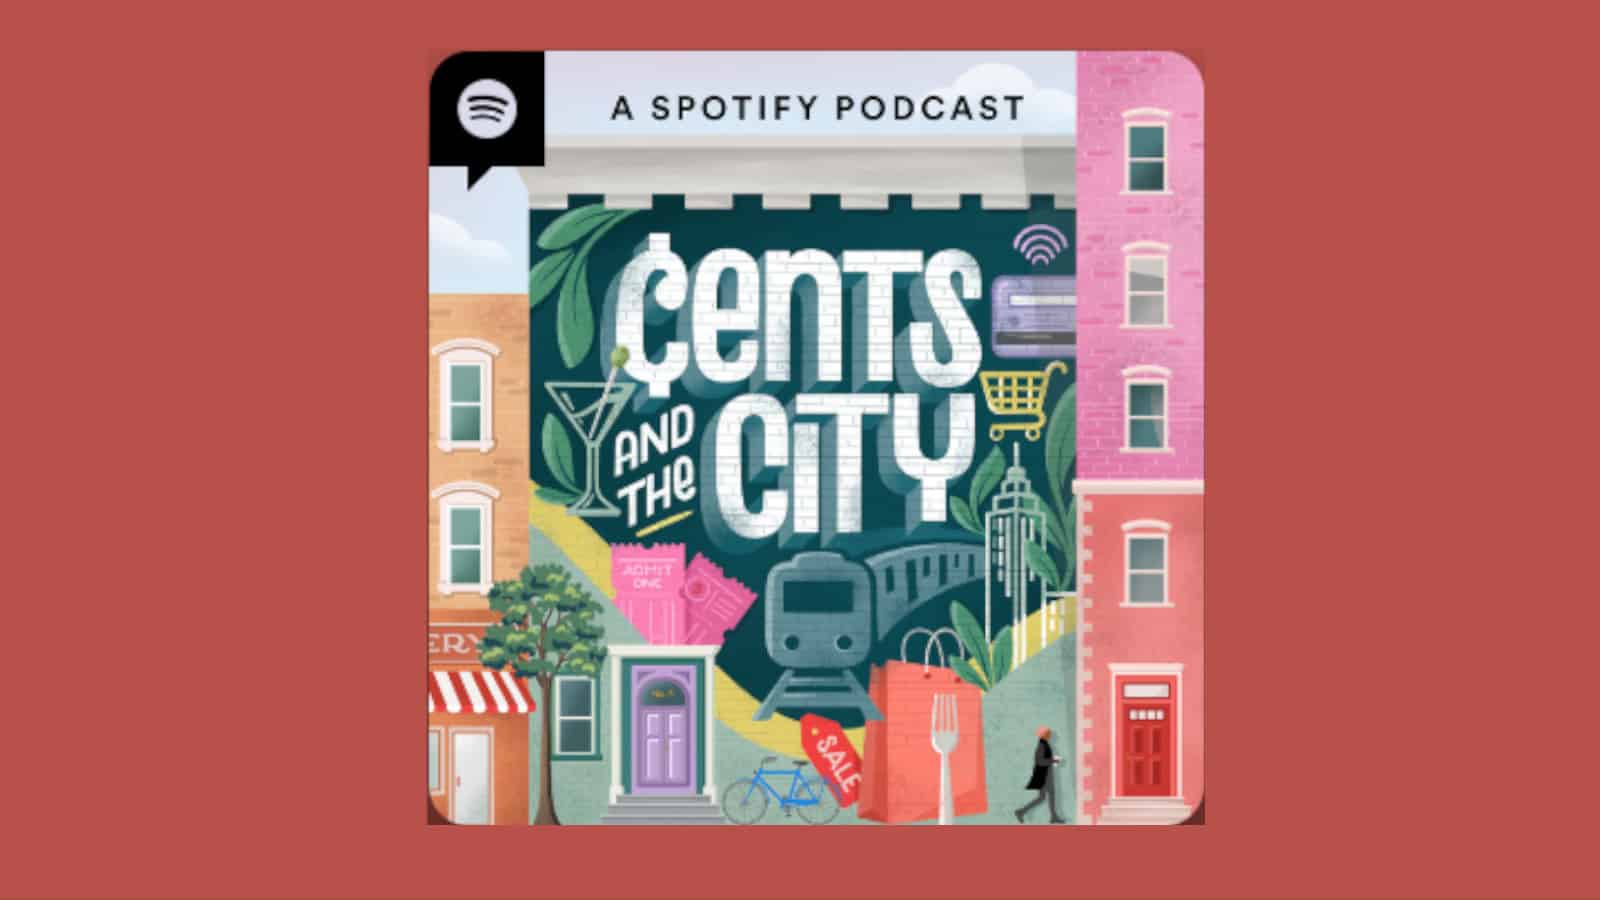 Cents in the city title